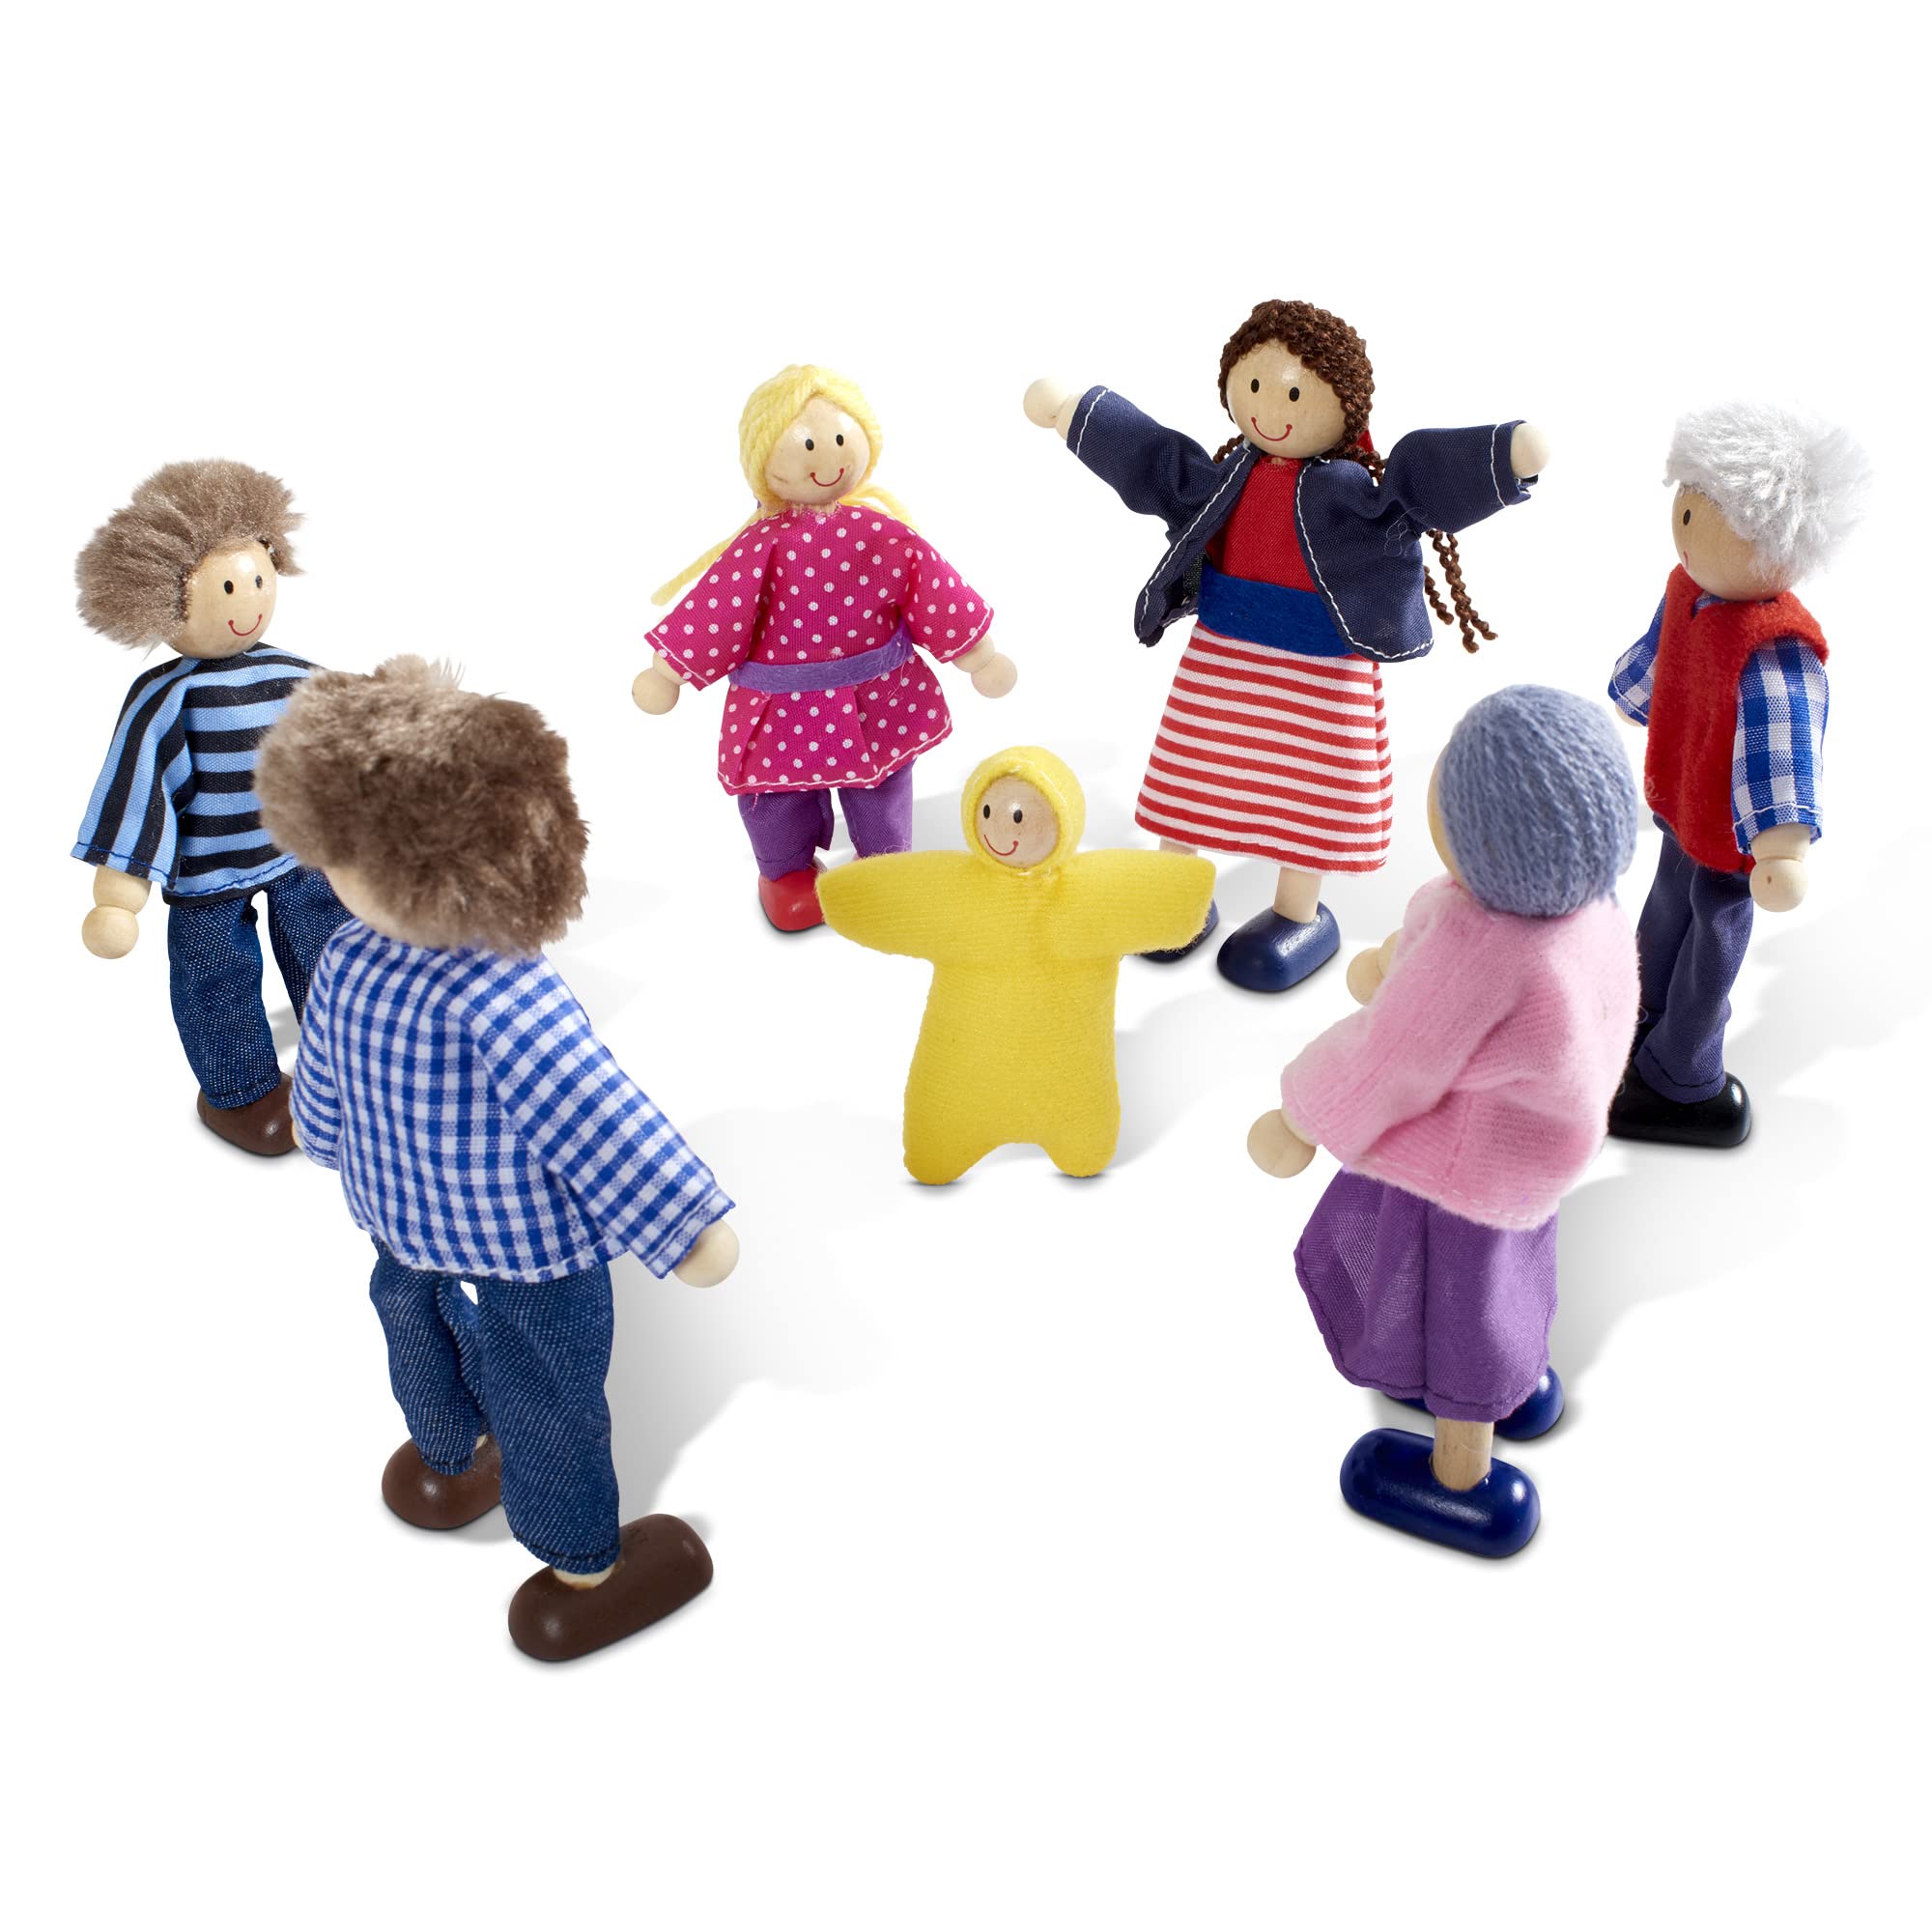 Melissa & Doug 7-Piece Poseable Wooden Doll Family for Dollhouse (2-4 inches each) - People Figures For Kids Ages 3+